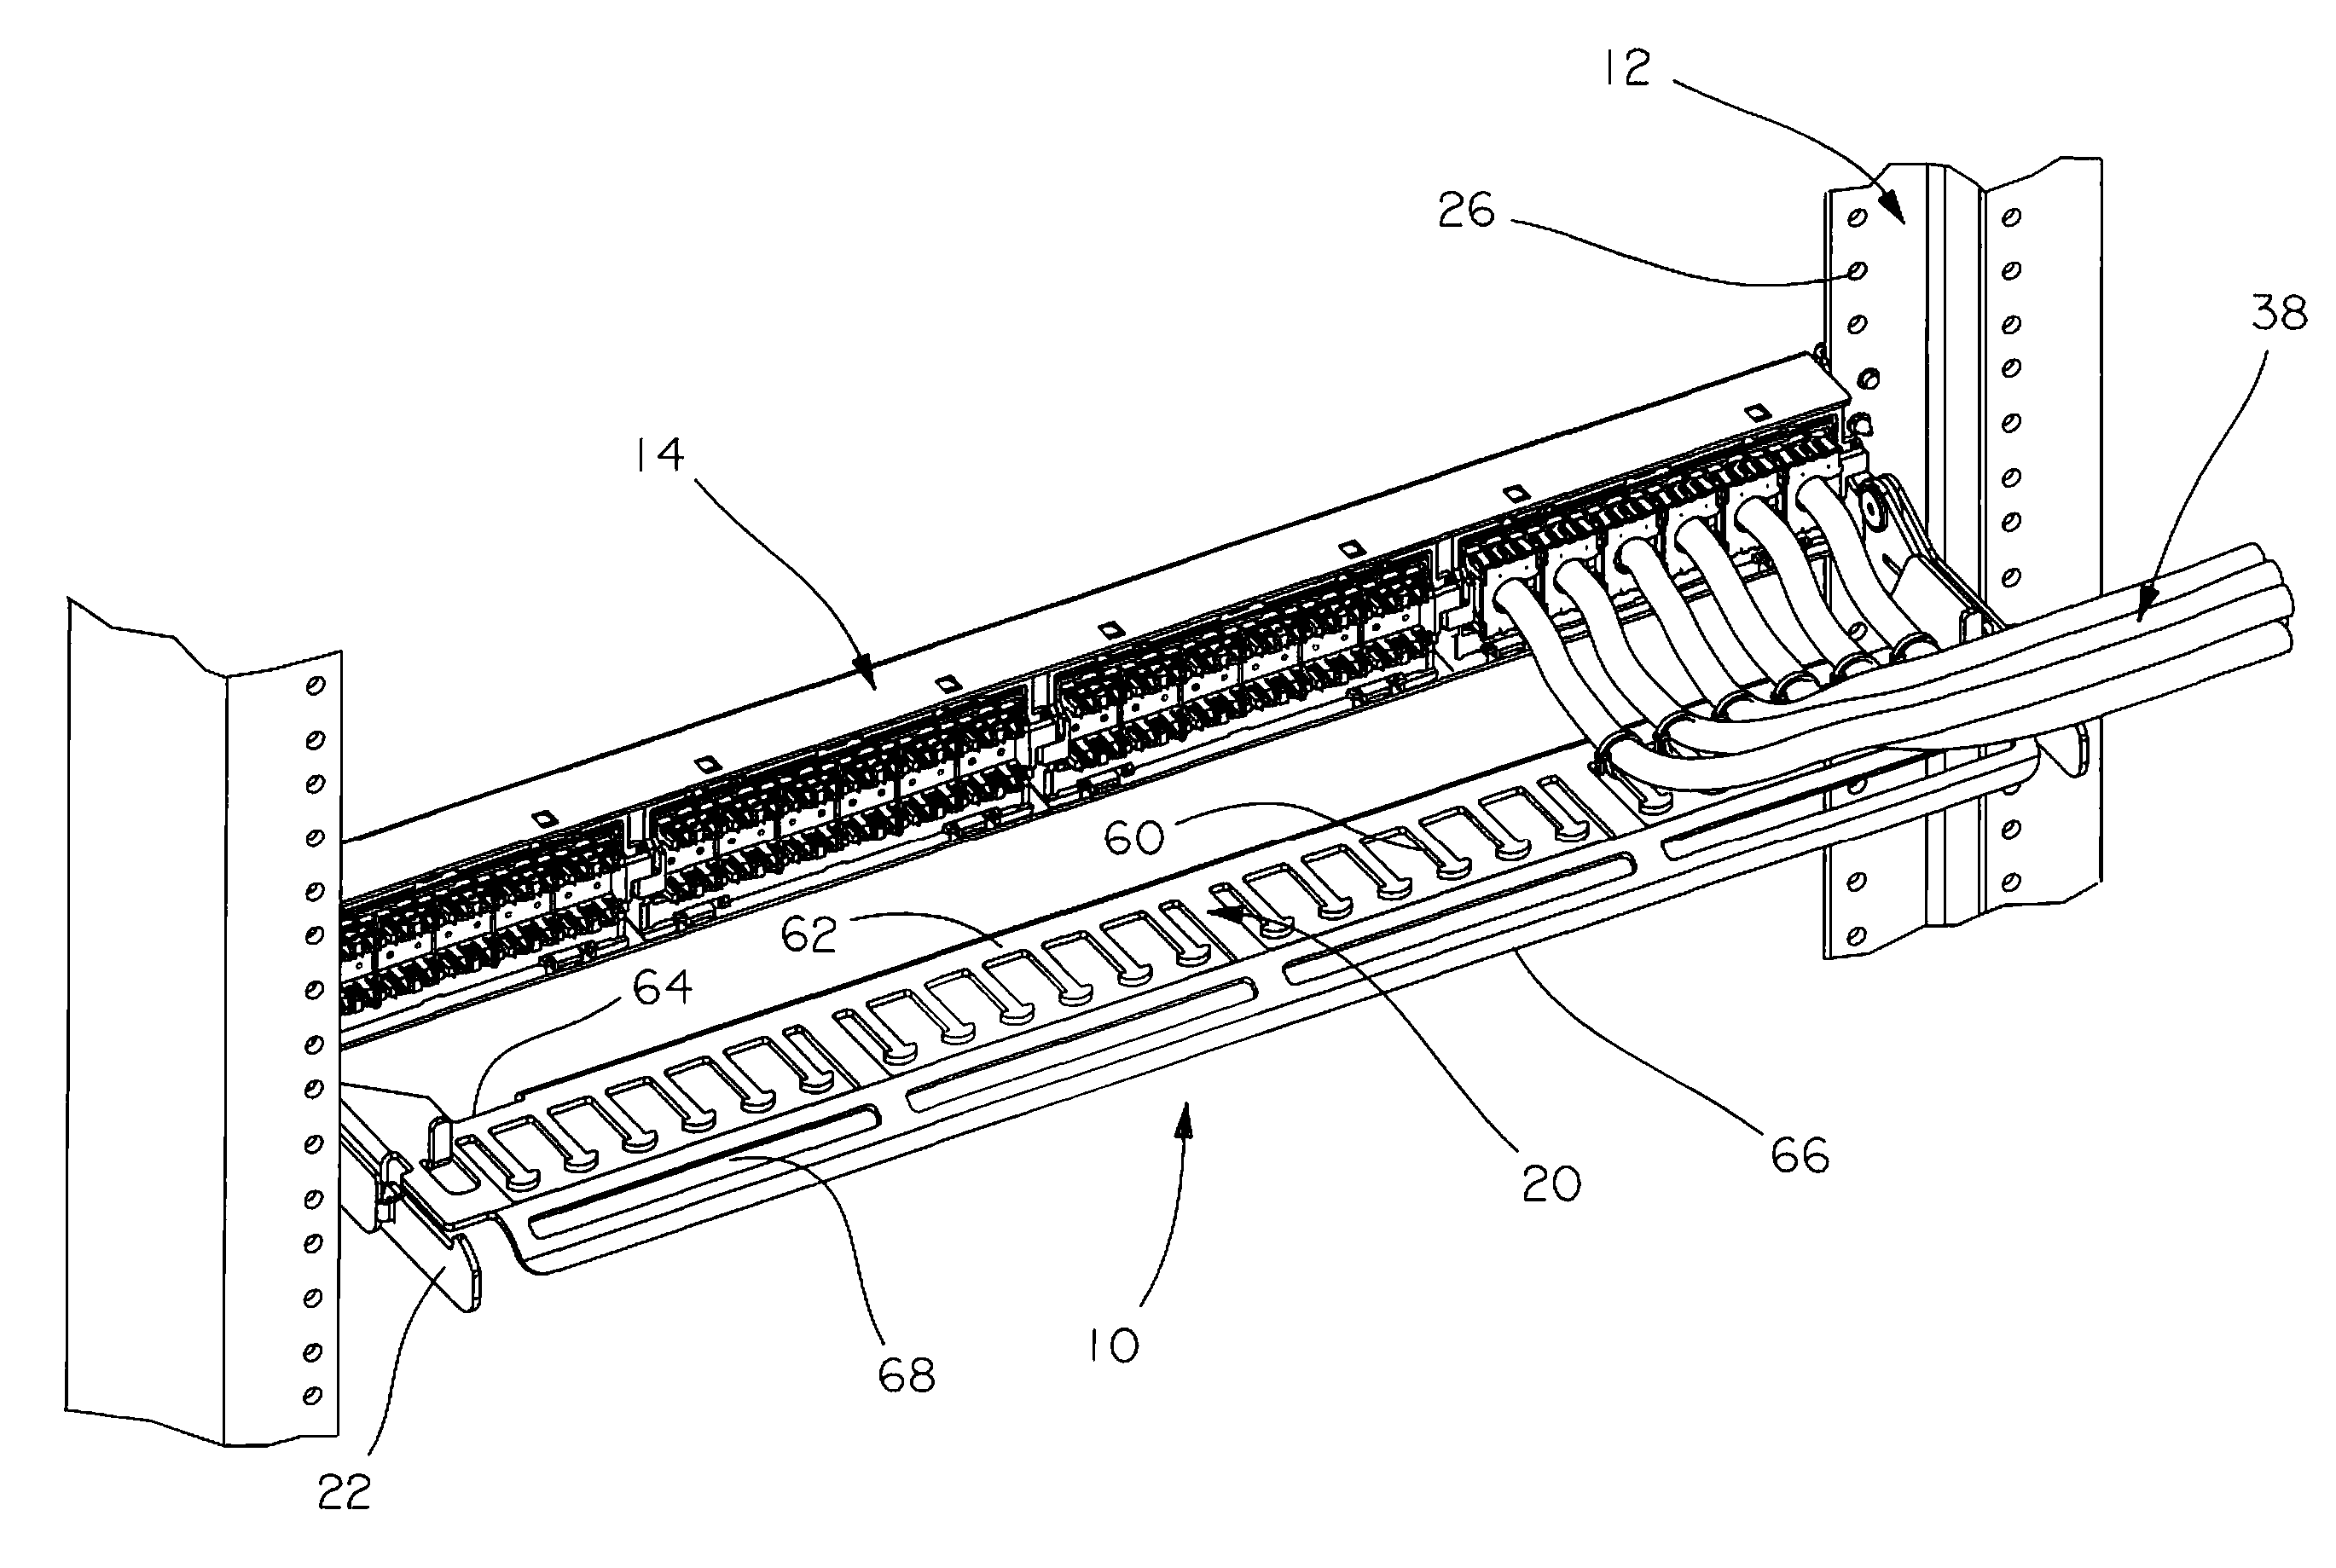 Pivoting strain relief bar for data patch panels